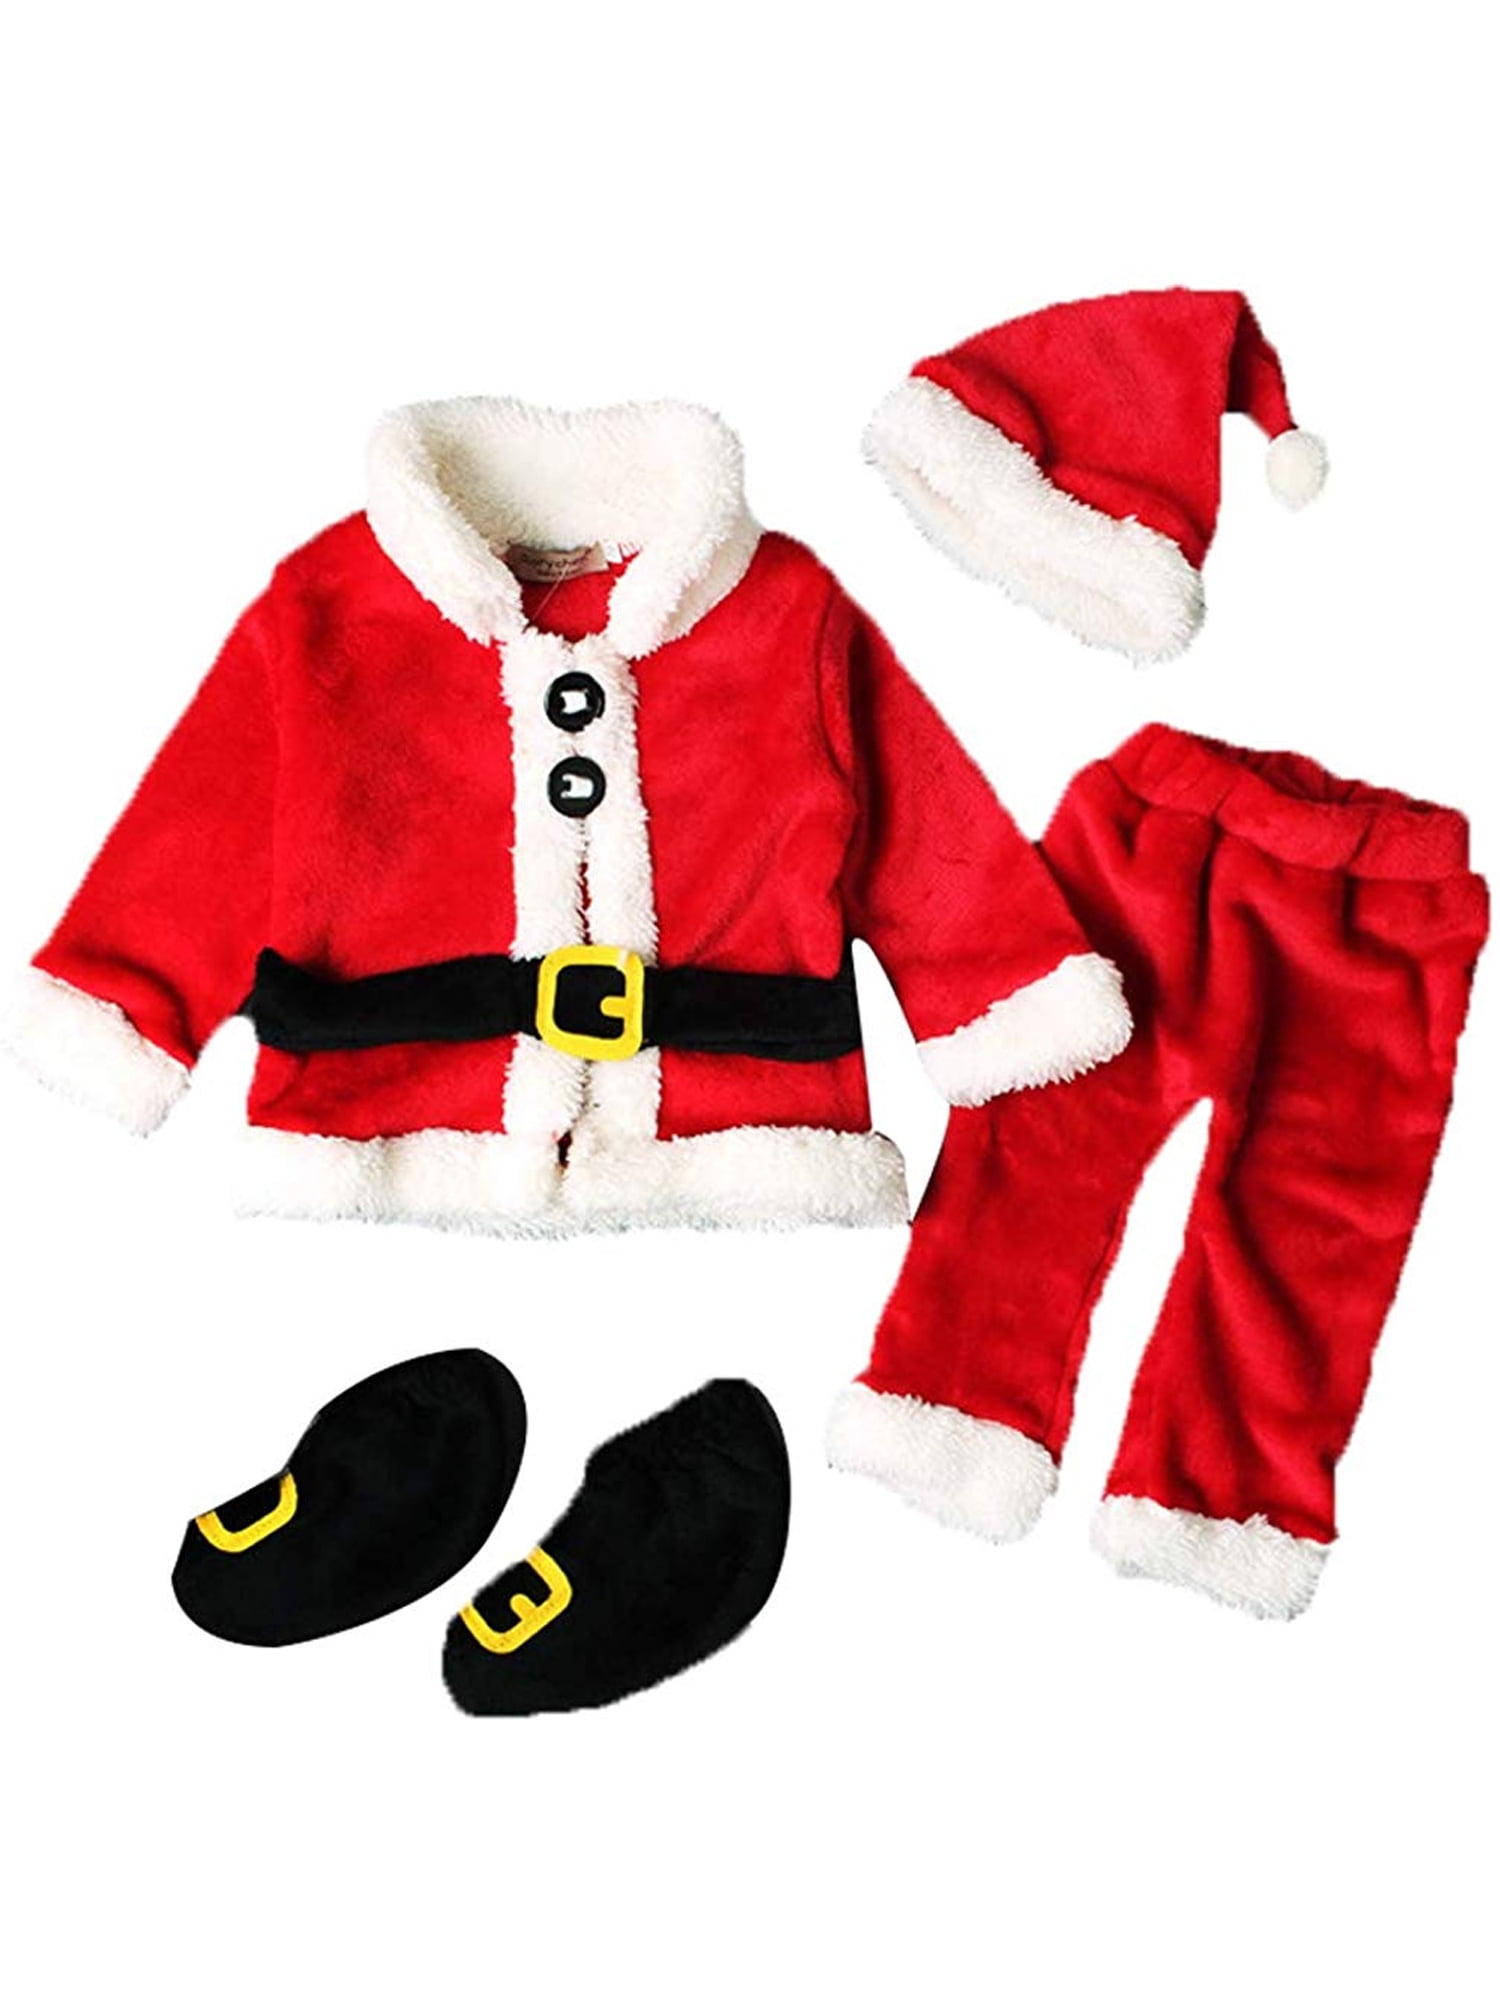 sunnymi 3Pcs My First Christmas Santa Clothes Set Toddler Newborn Infant Baby Boy Girl Deer Romper Tops+Pants+Hat Outfits